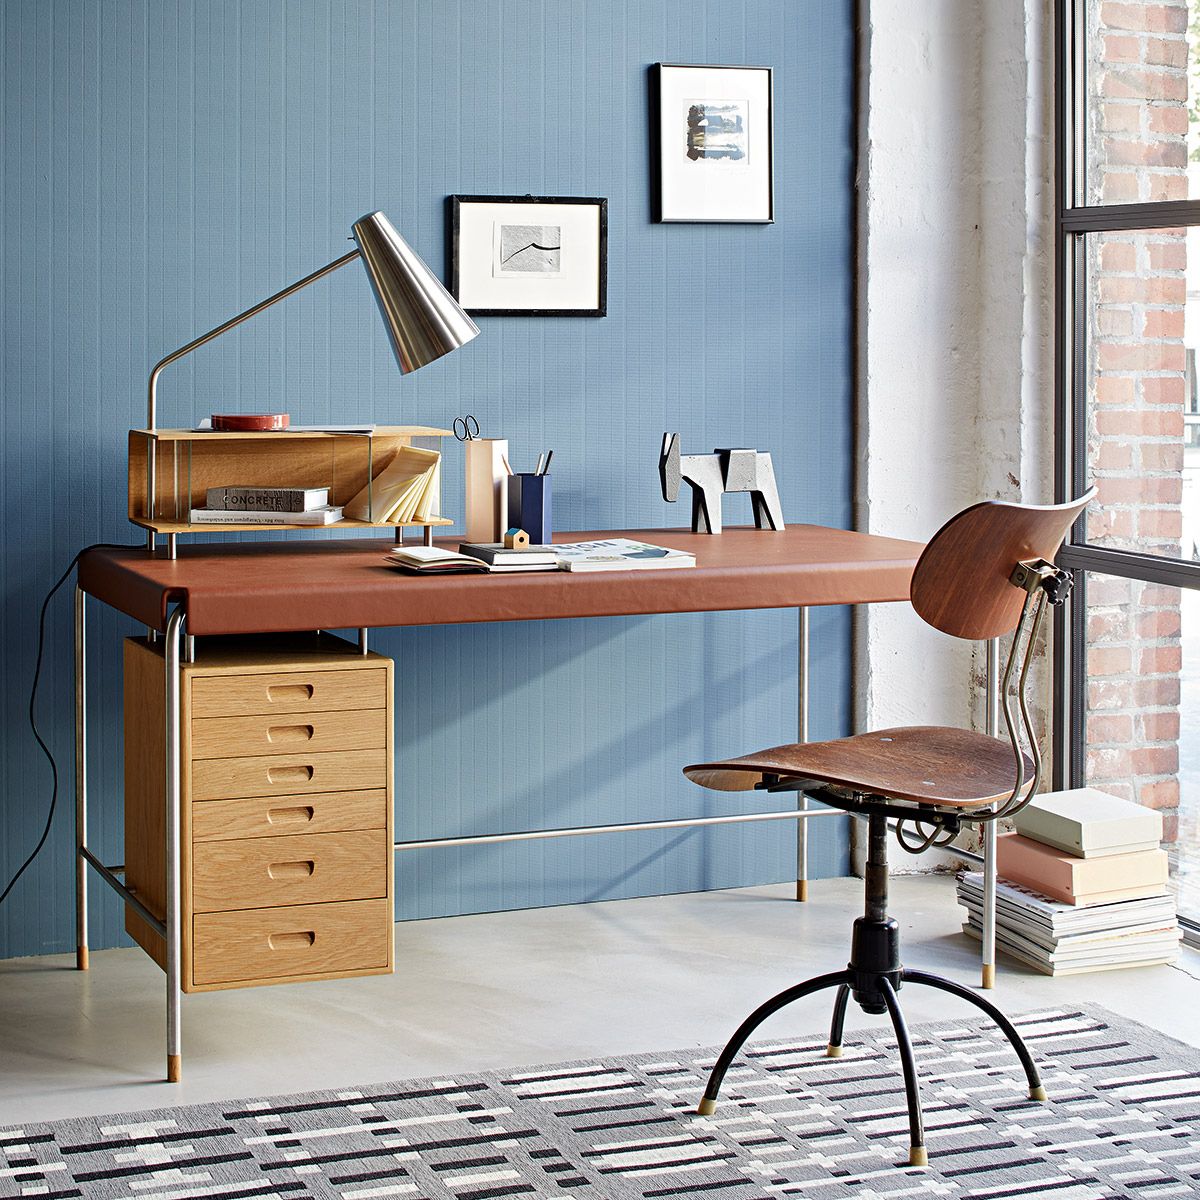 10 trendy desks to adopt for back to school